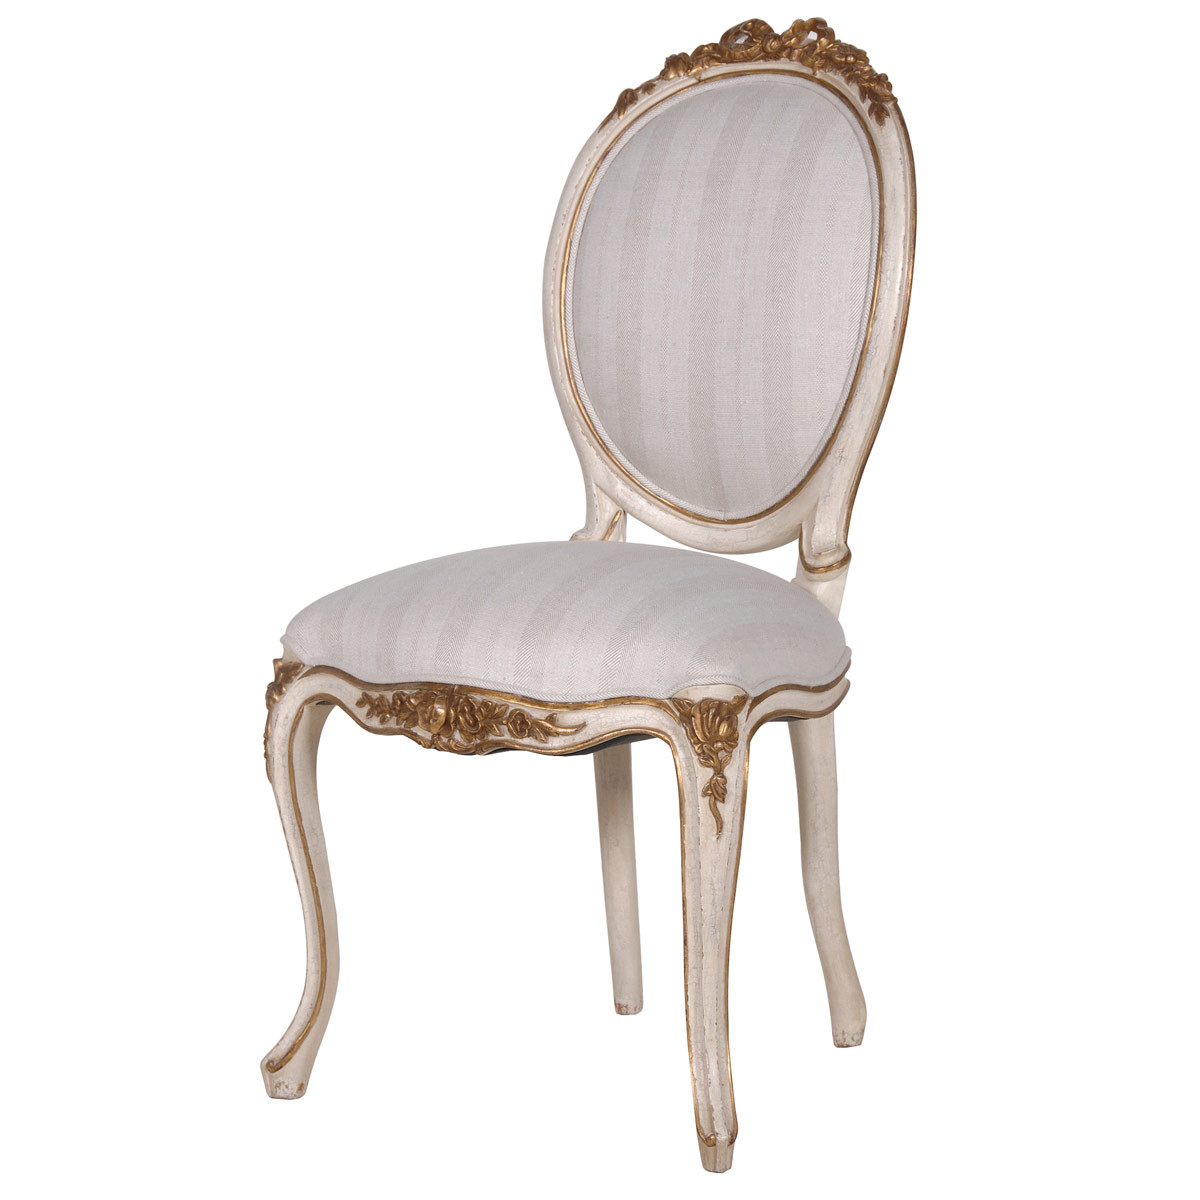 Marie Antoinette French Chateau Chair Antique White Gold